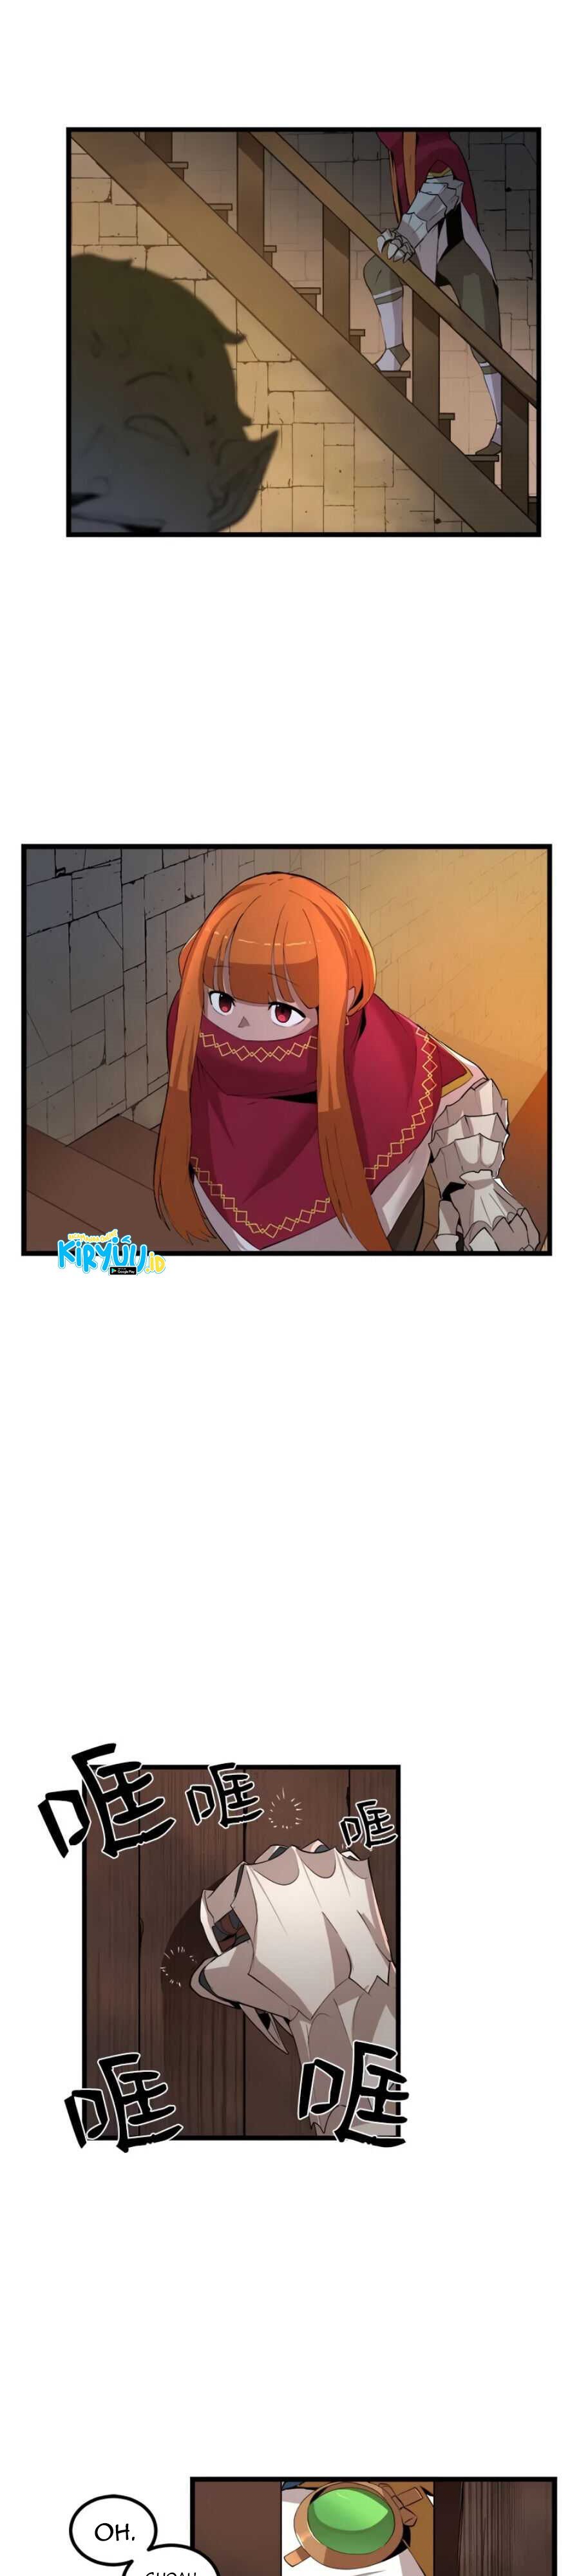 The Dungeon Master Chapter 90